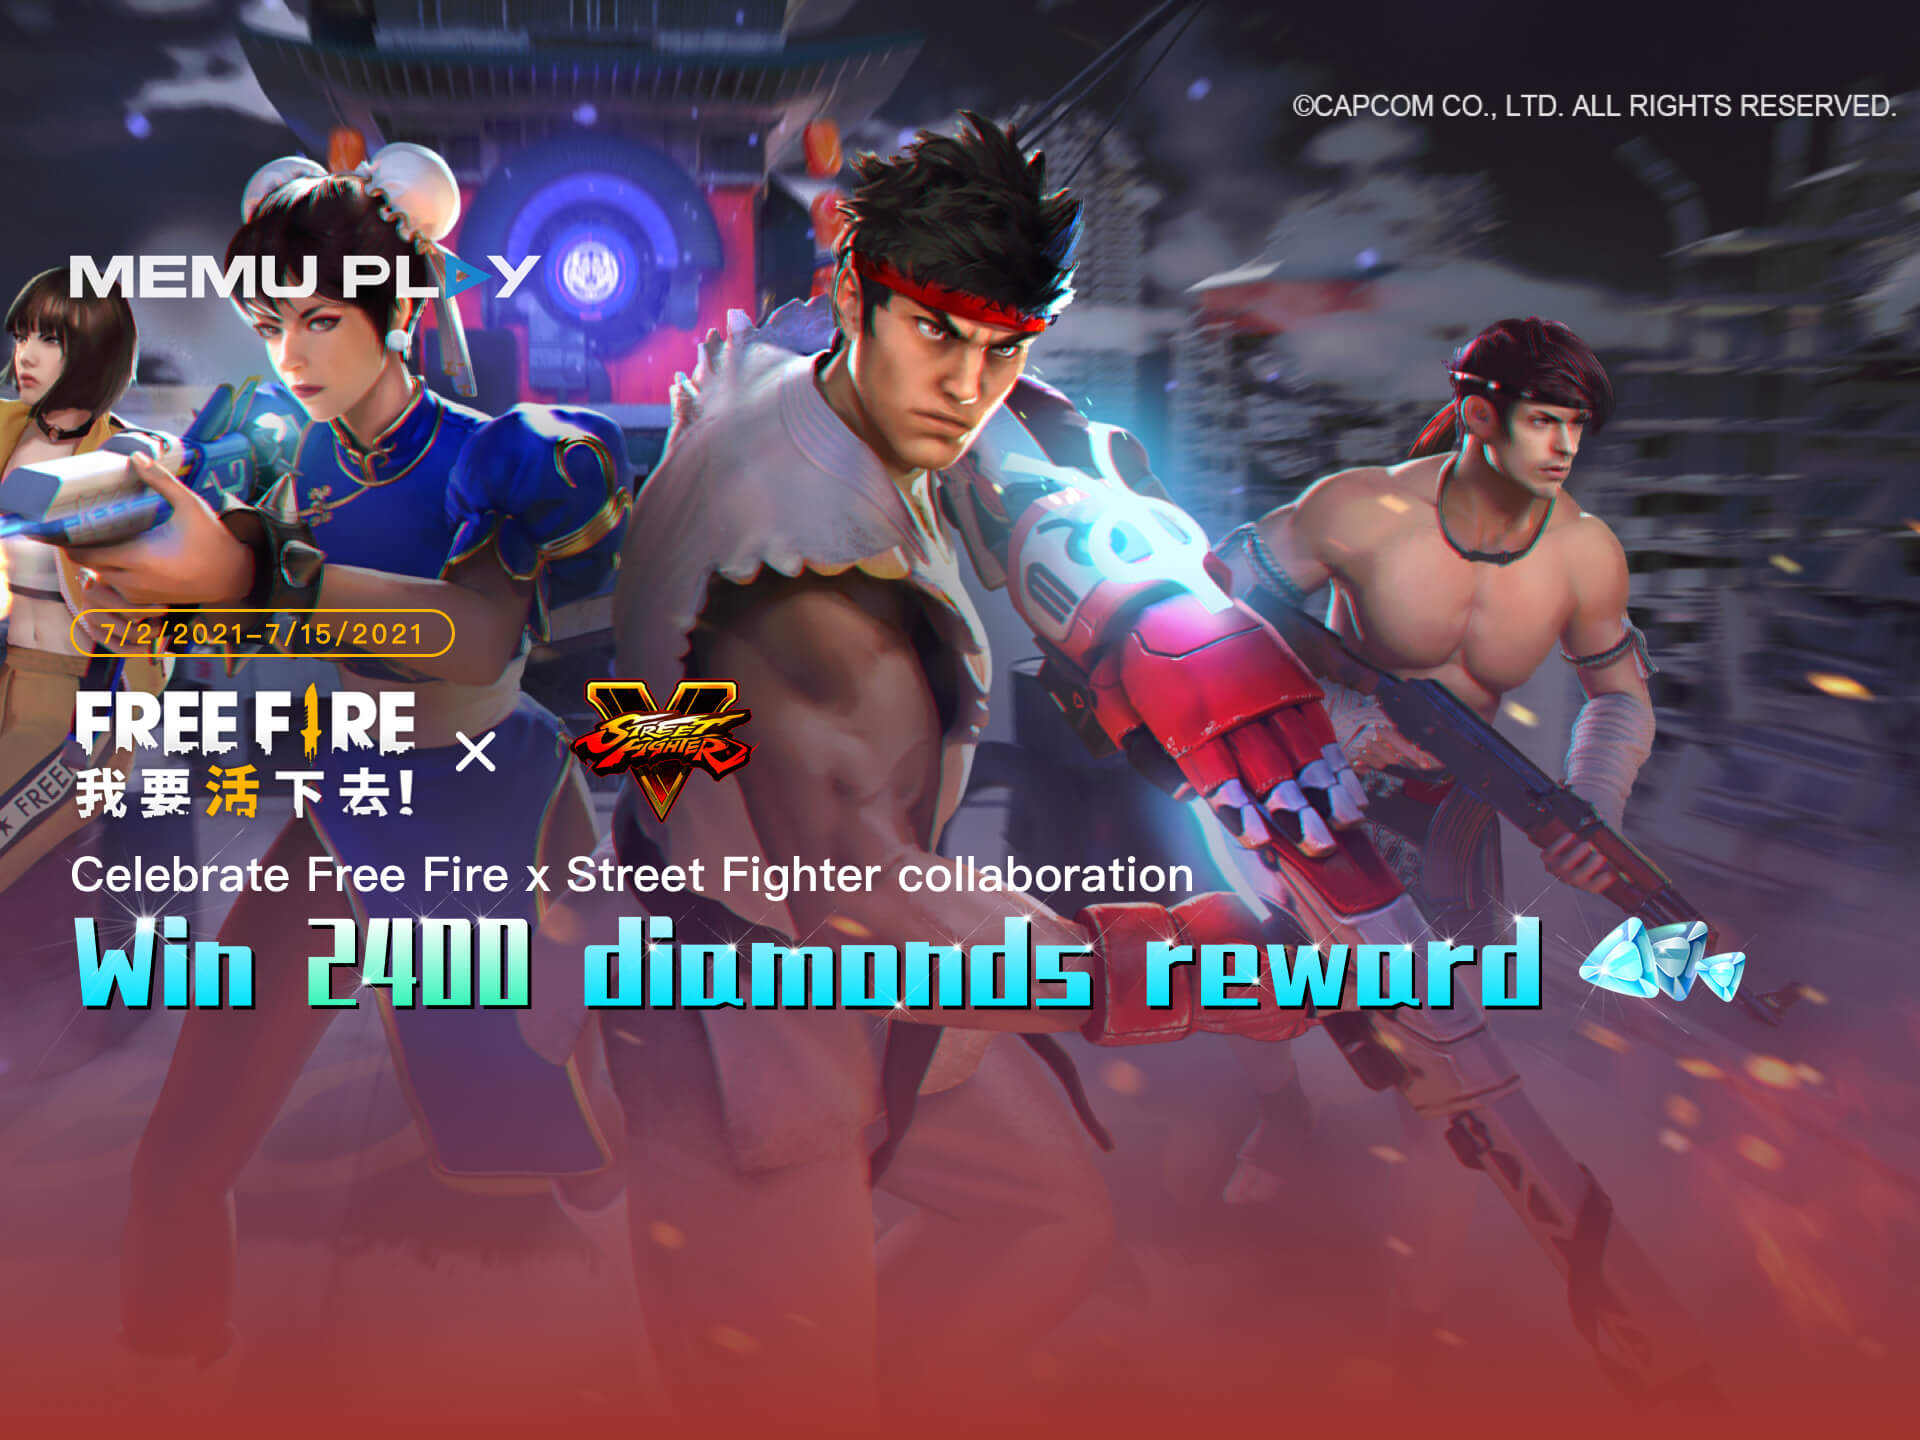 Garena Free Fire Wins Mobile Game Of The Year At Esports Awards 2020 - Fan  Engagement and Gaming Experience Platform